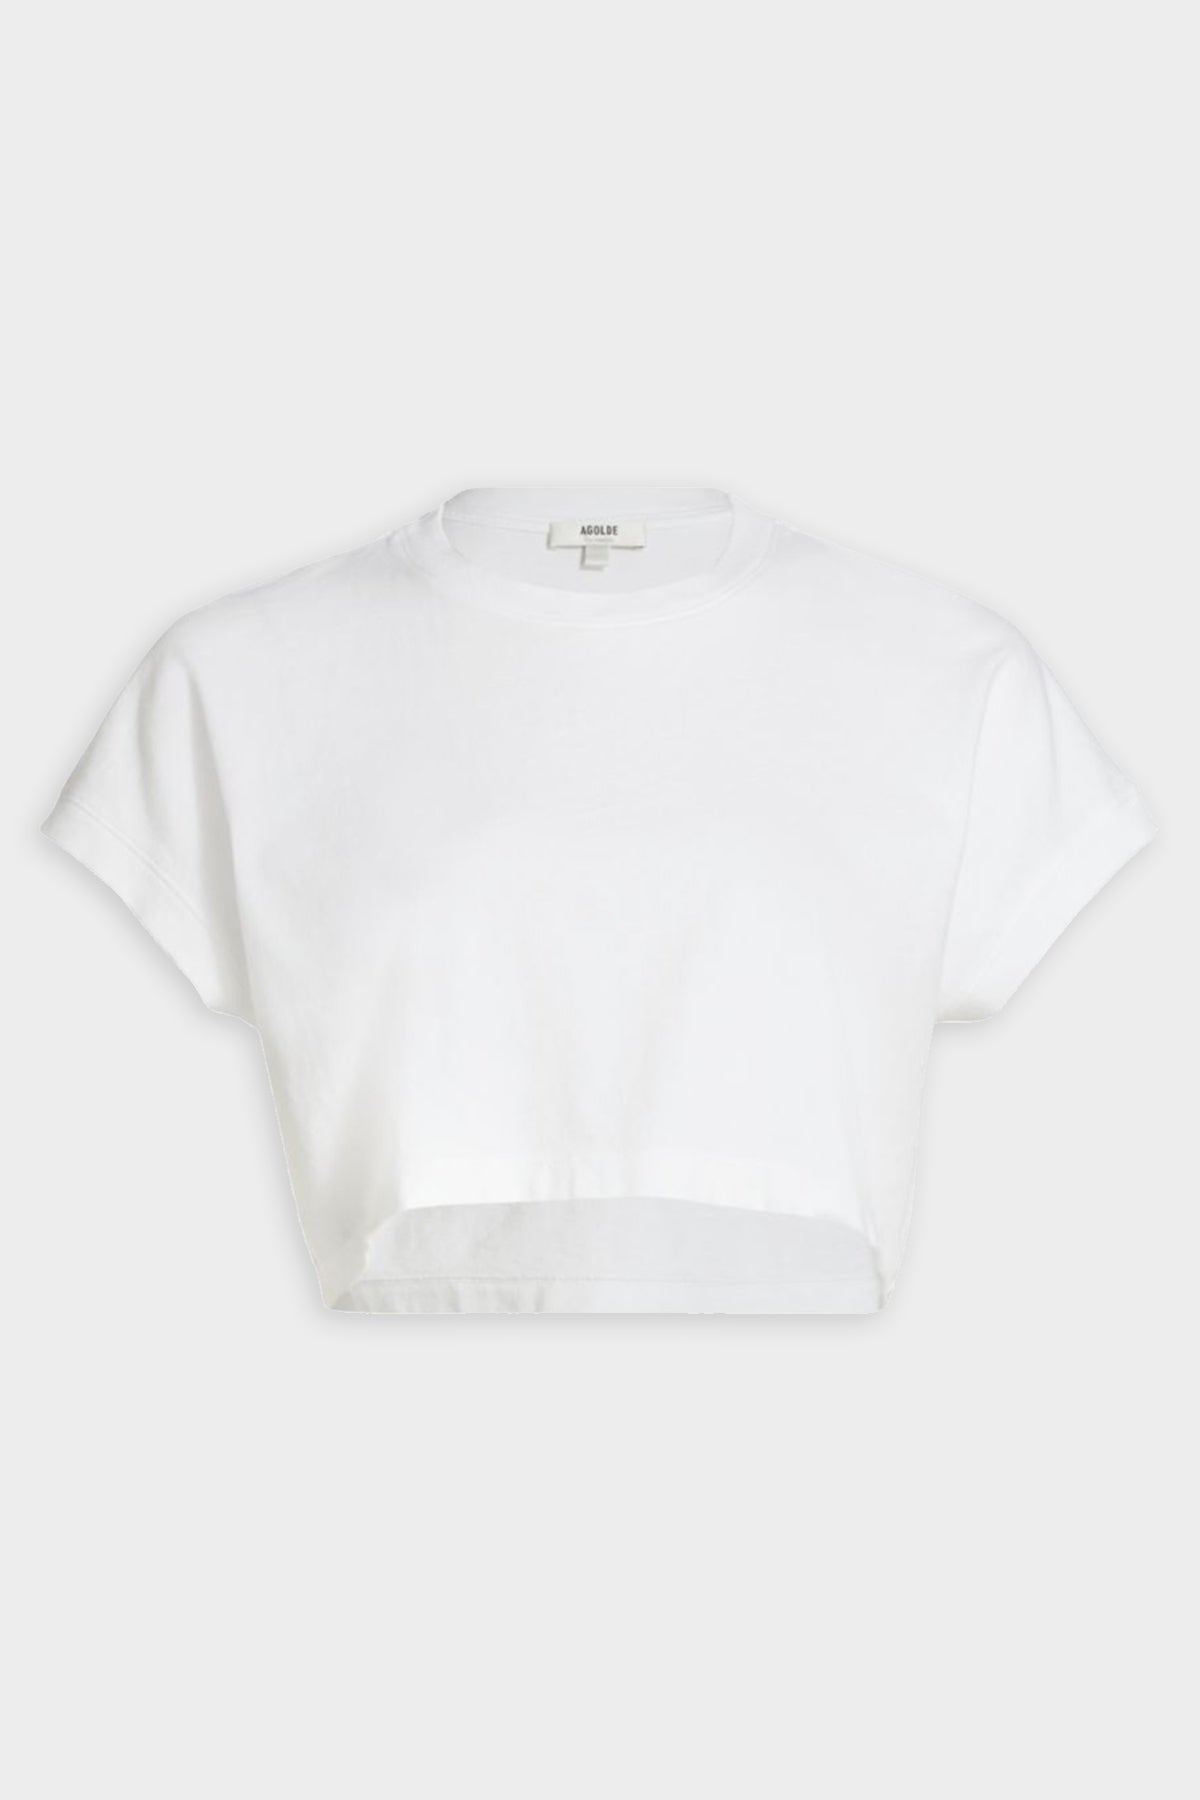 Aiden Tee in White - shop-olivia.com